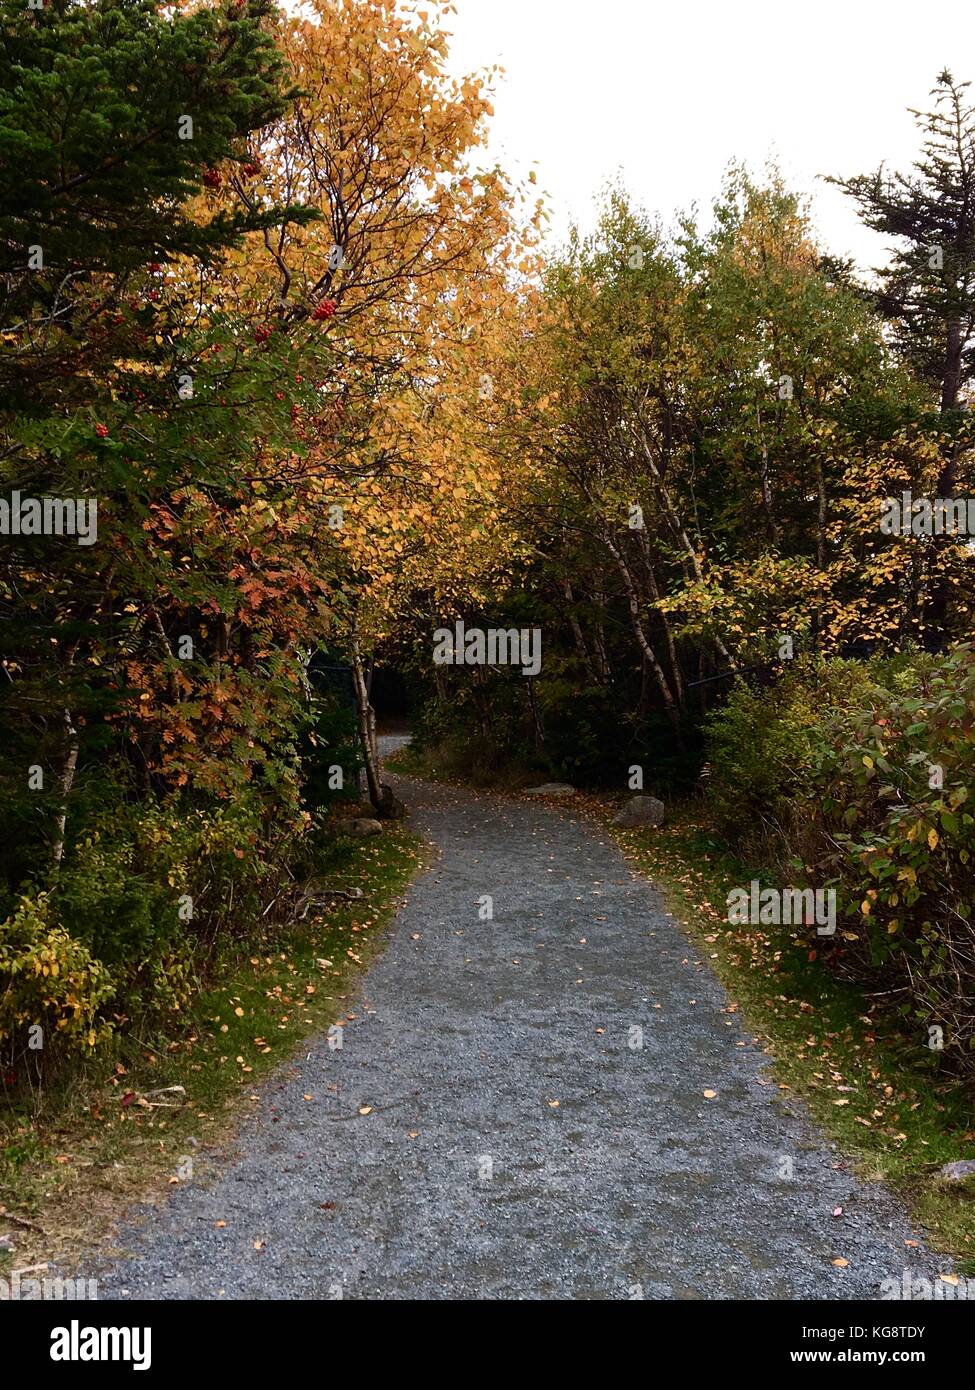 Gravel walking trail lined on both sides with trees, the leaves have turned to autumn colors, some have fallen and lay in the grass Stock Photo